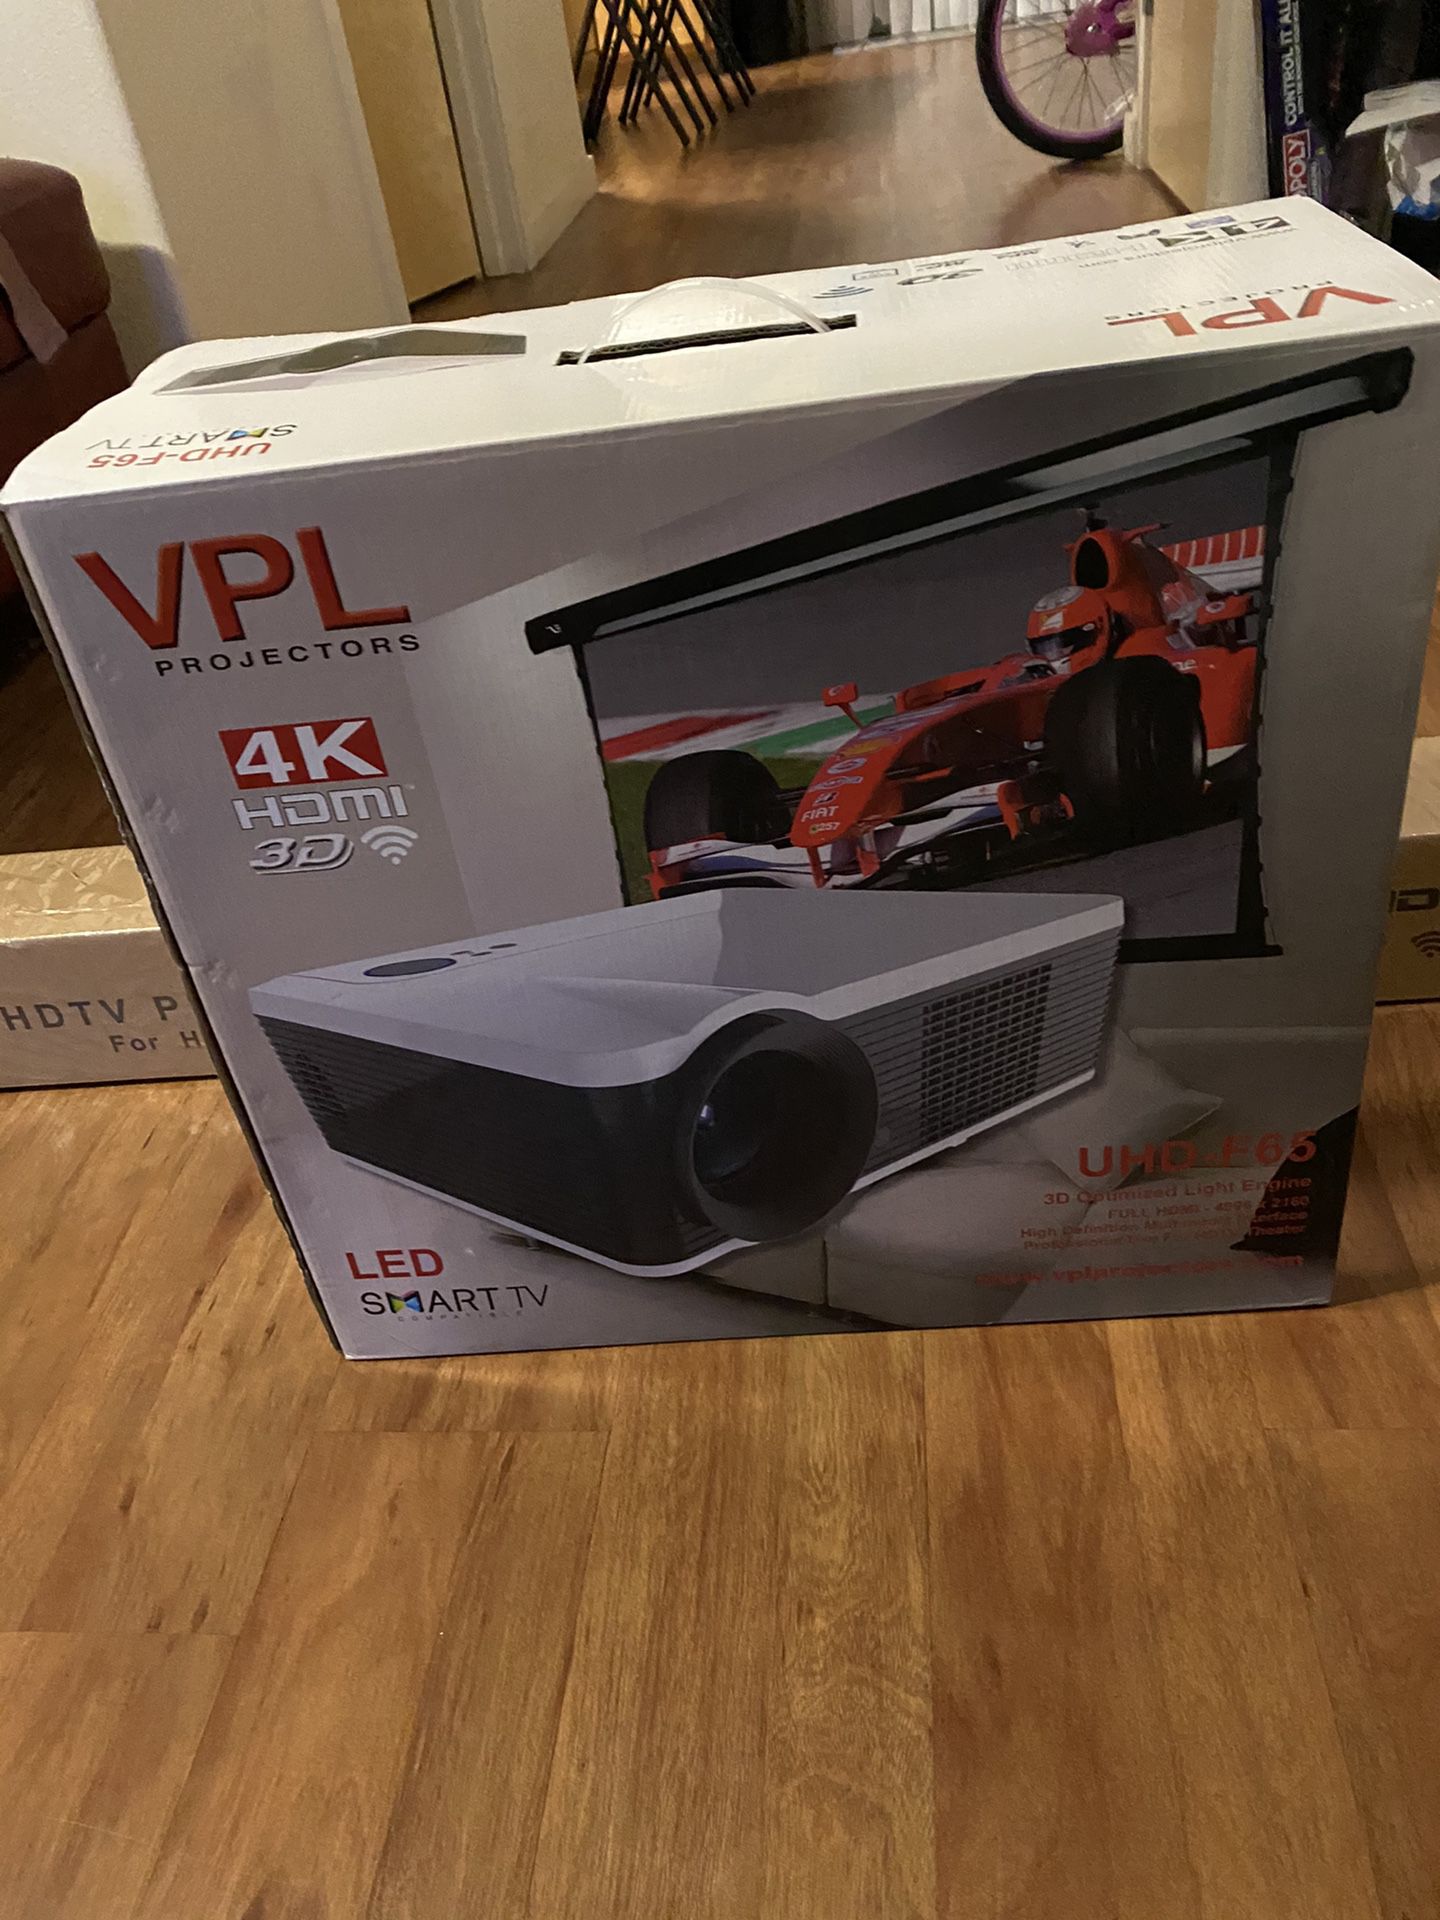 VPL PROJECTOR AND PROJECTOR SCREEN BRAND NEW